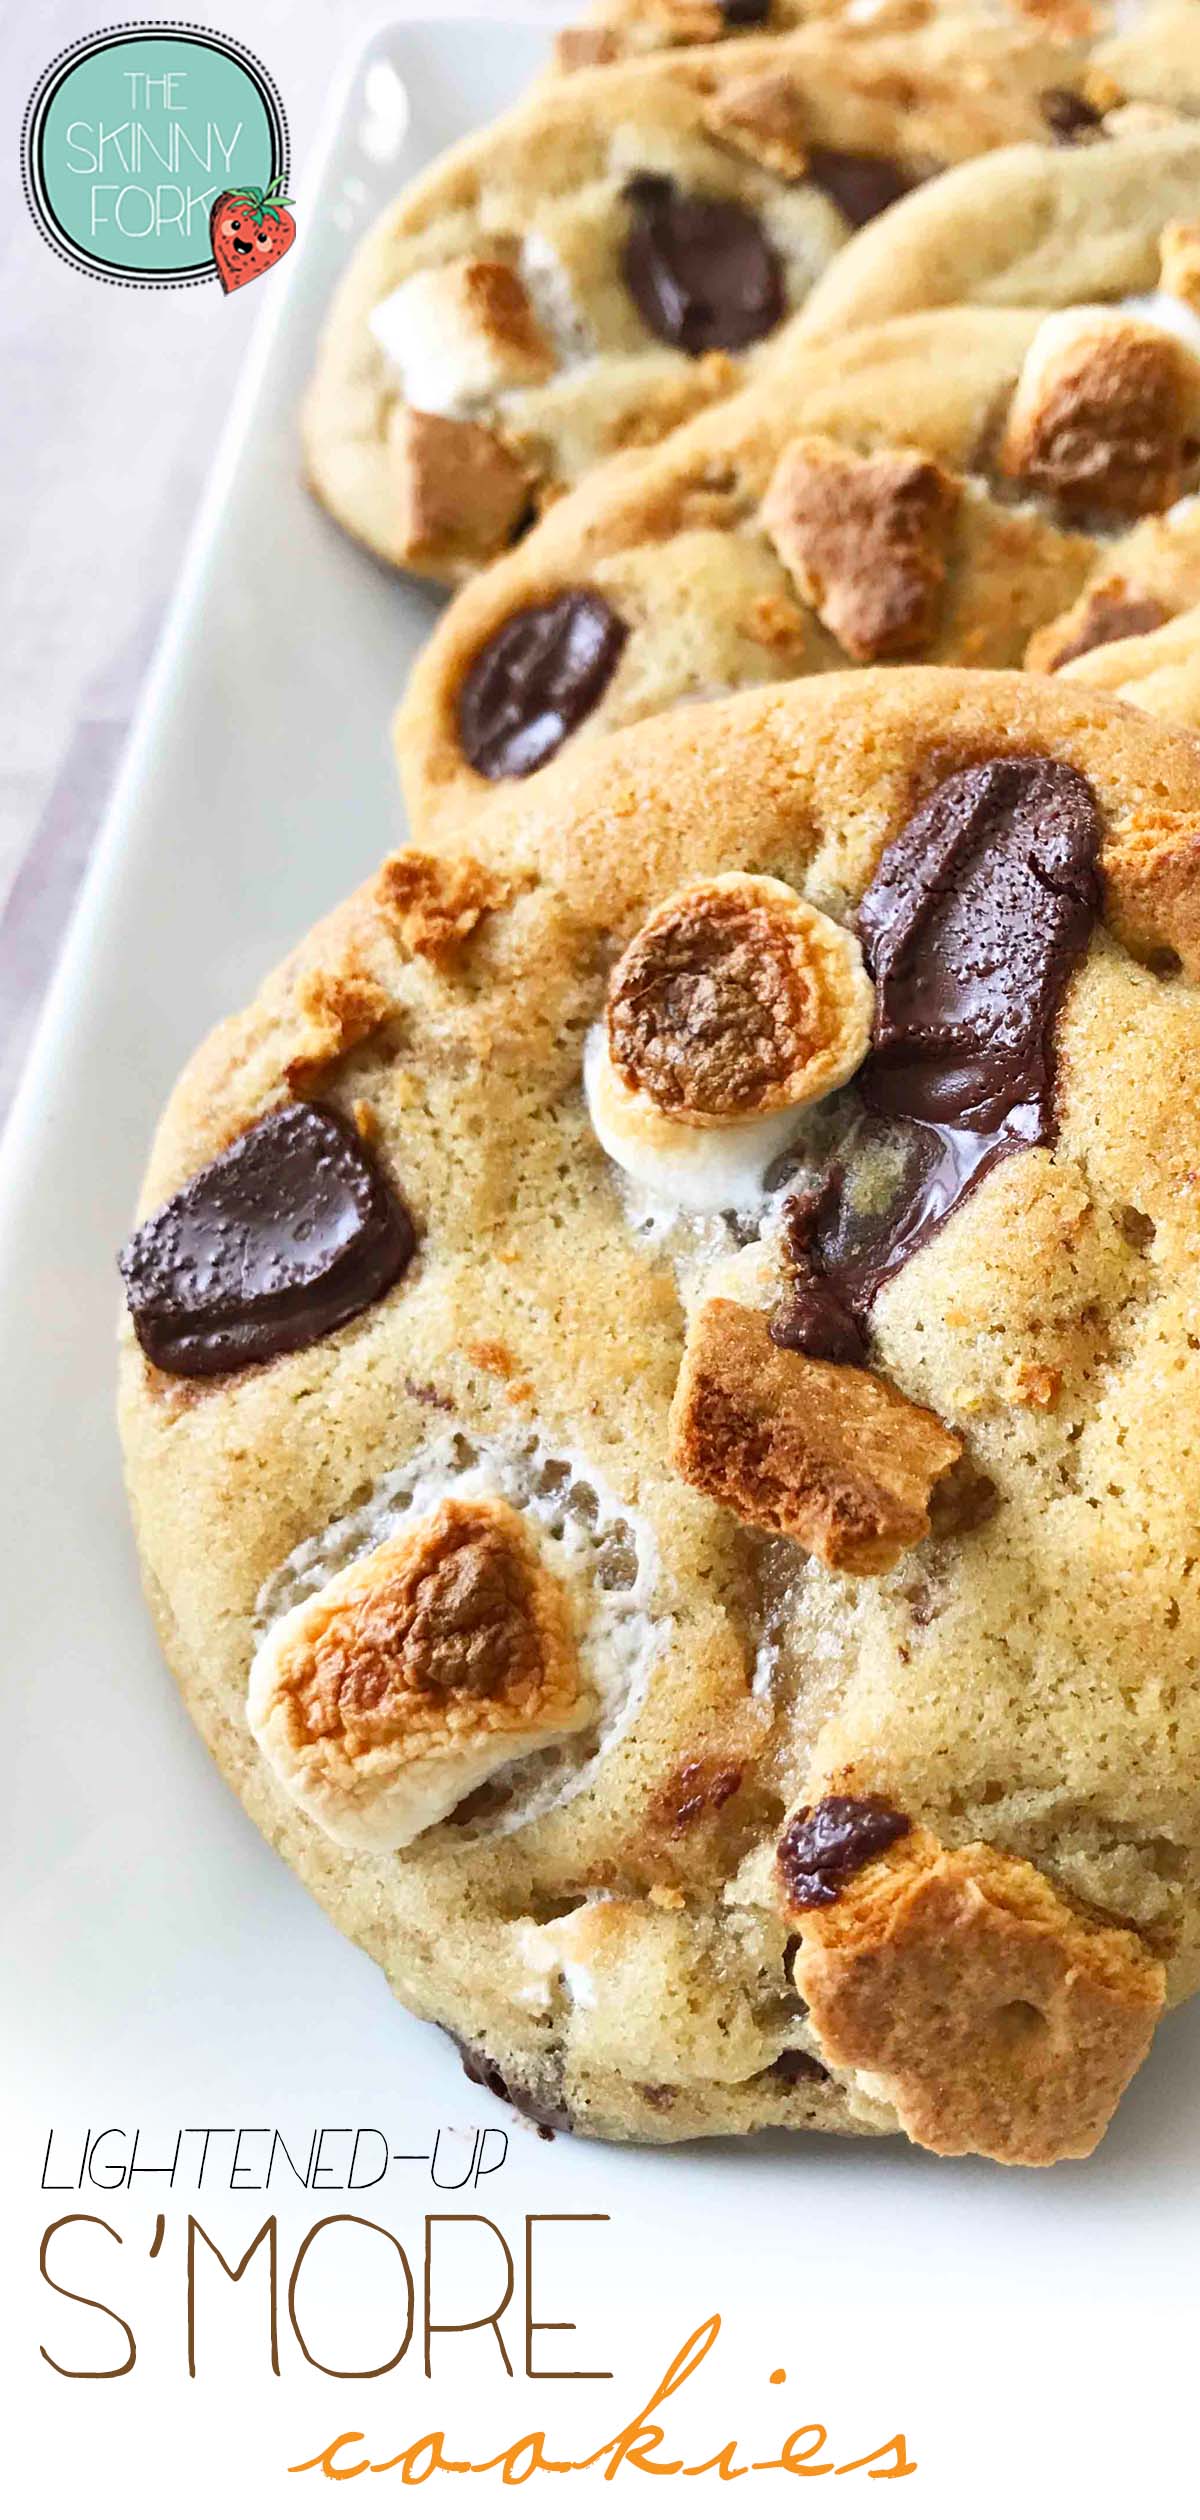 Lightened-Up S'more Chocolate Chip Cookies